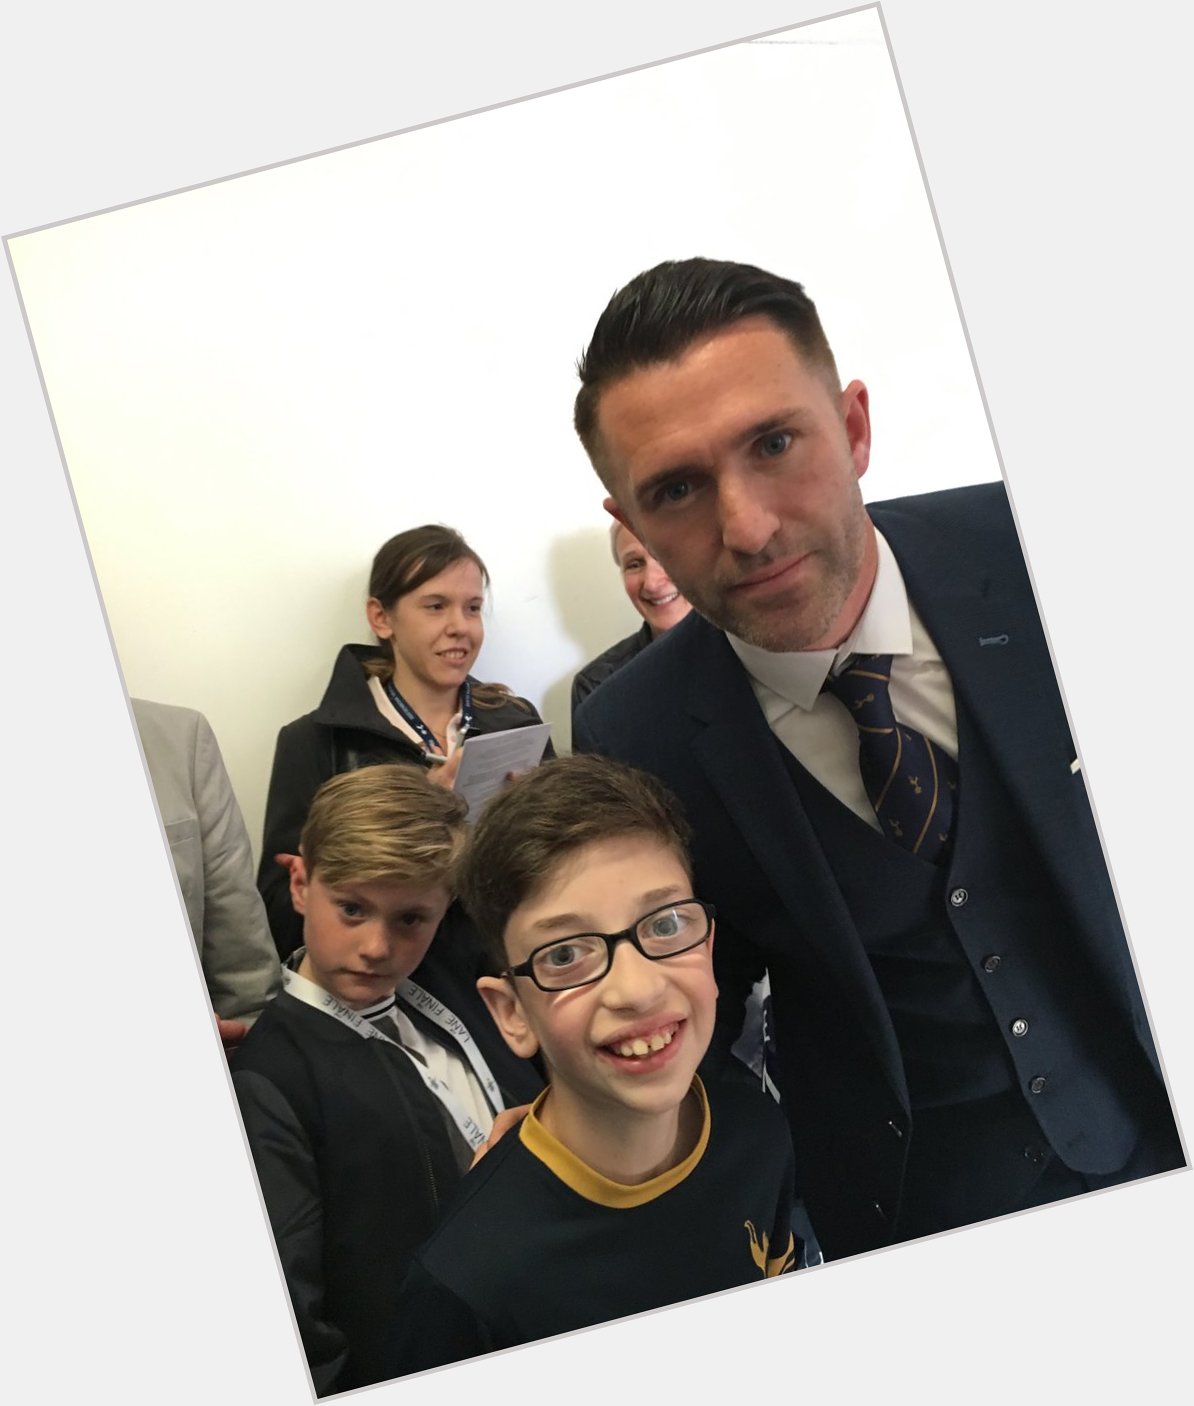 Happy Birthday Robbie Keane! You were Top Man when you met my Boy. You picked a good one there   